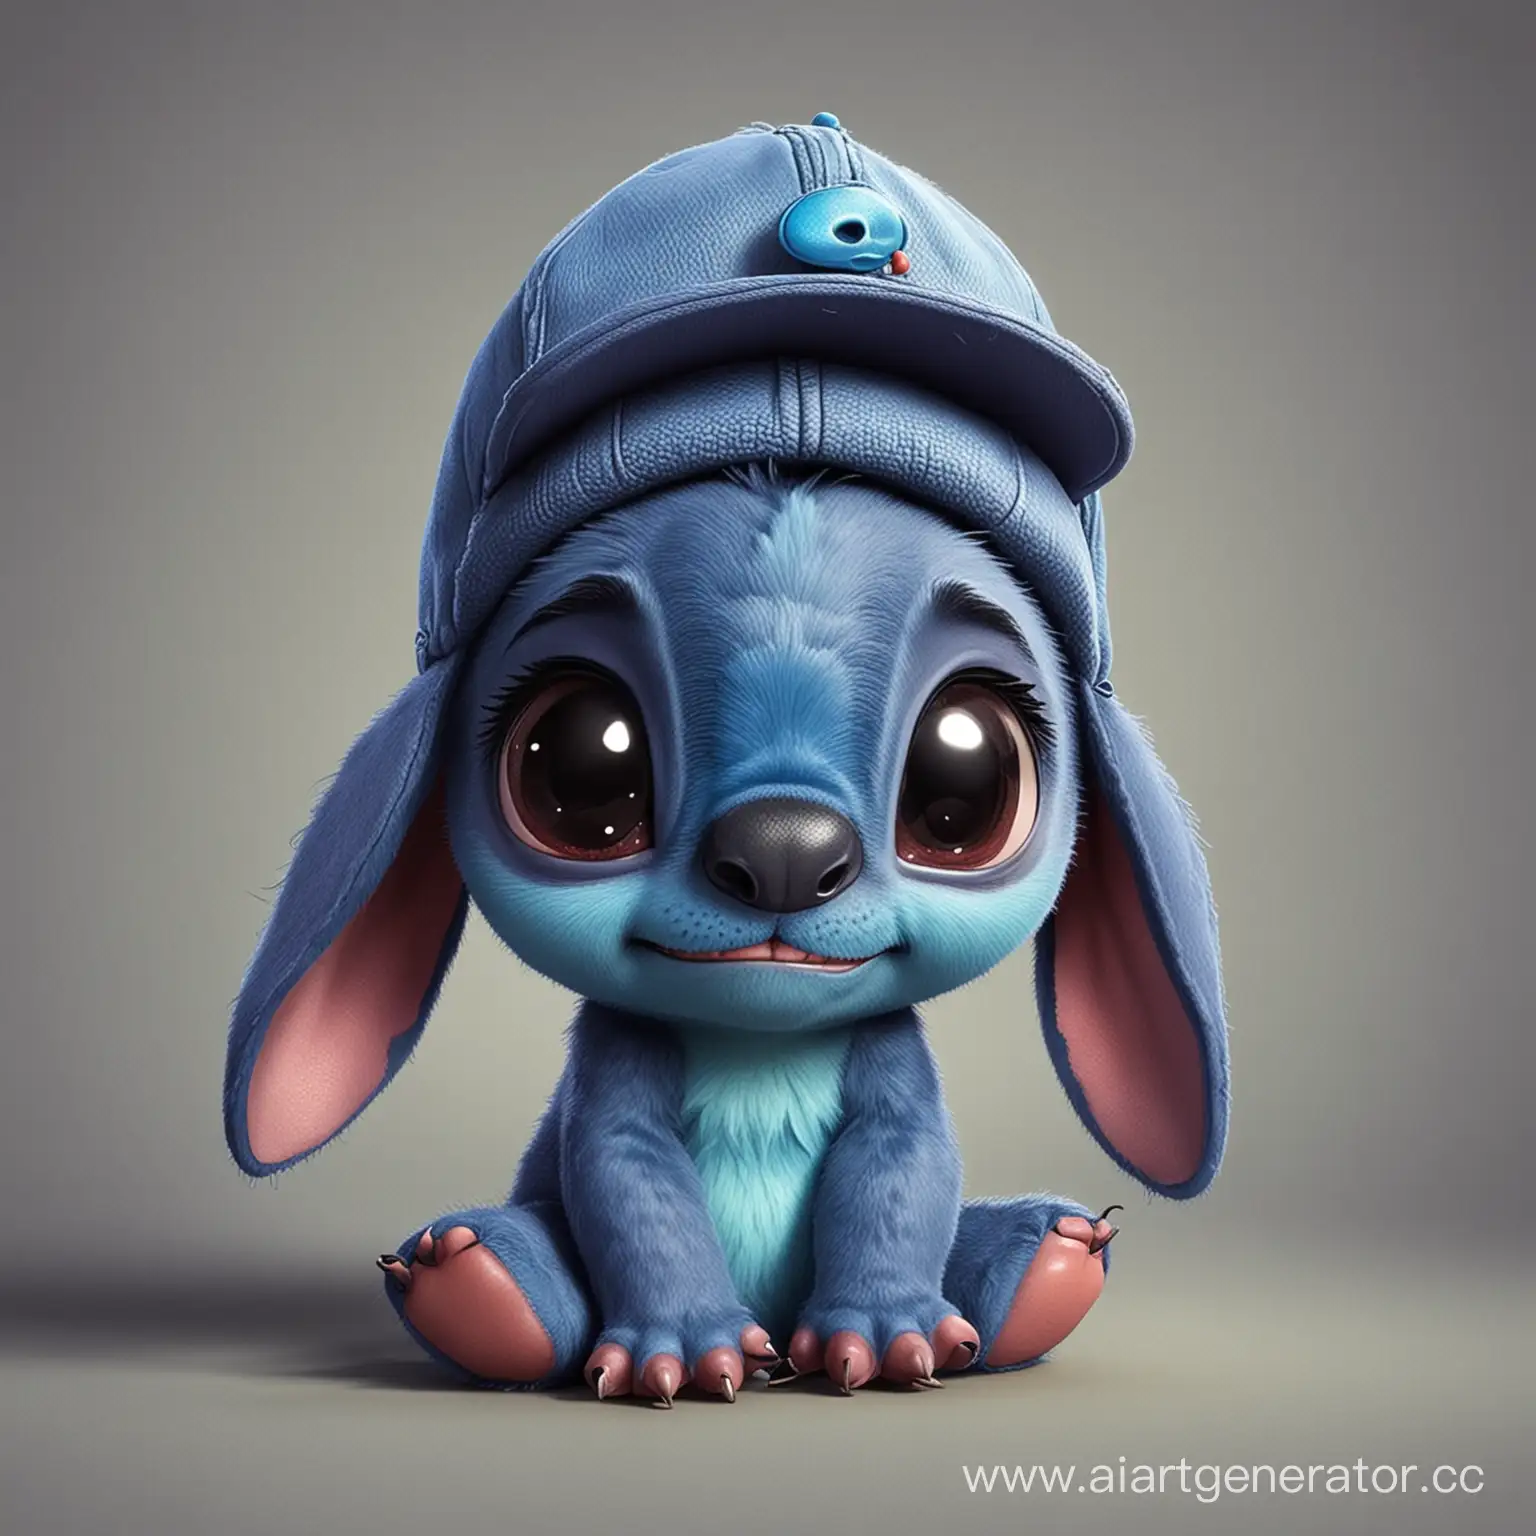 Adorable-Stitch-Character-Wearing-Hat-from-Lilo-Stitch-Cartoon